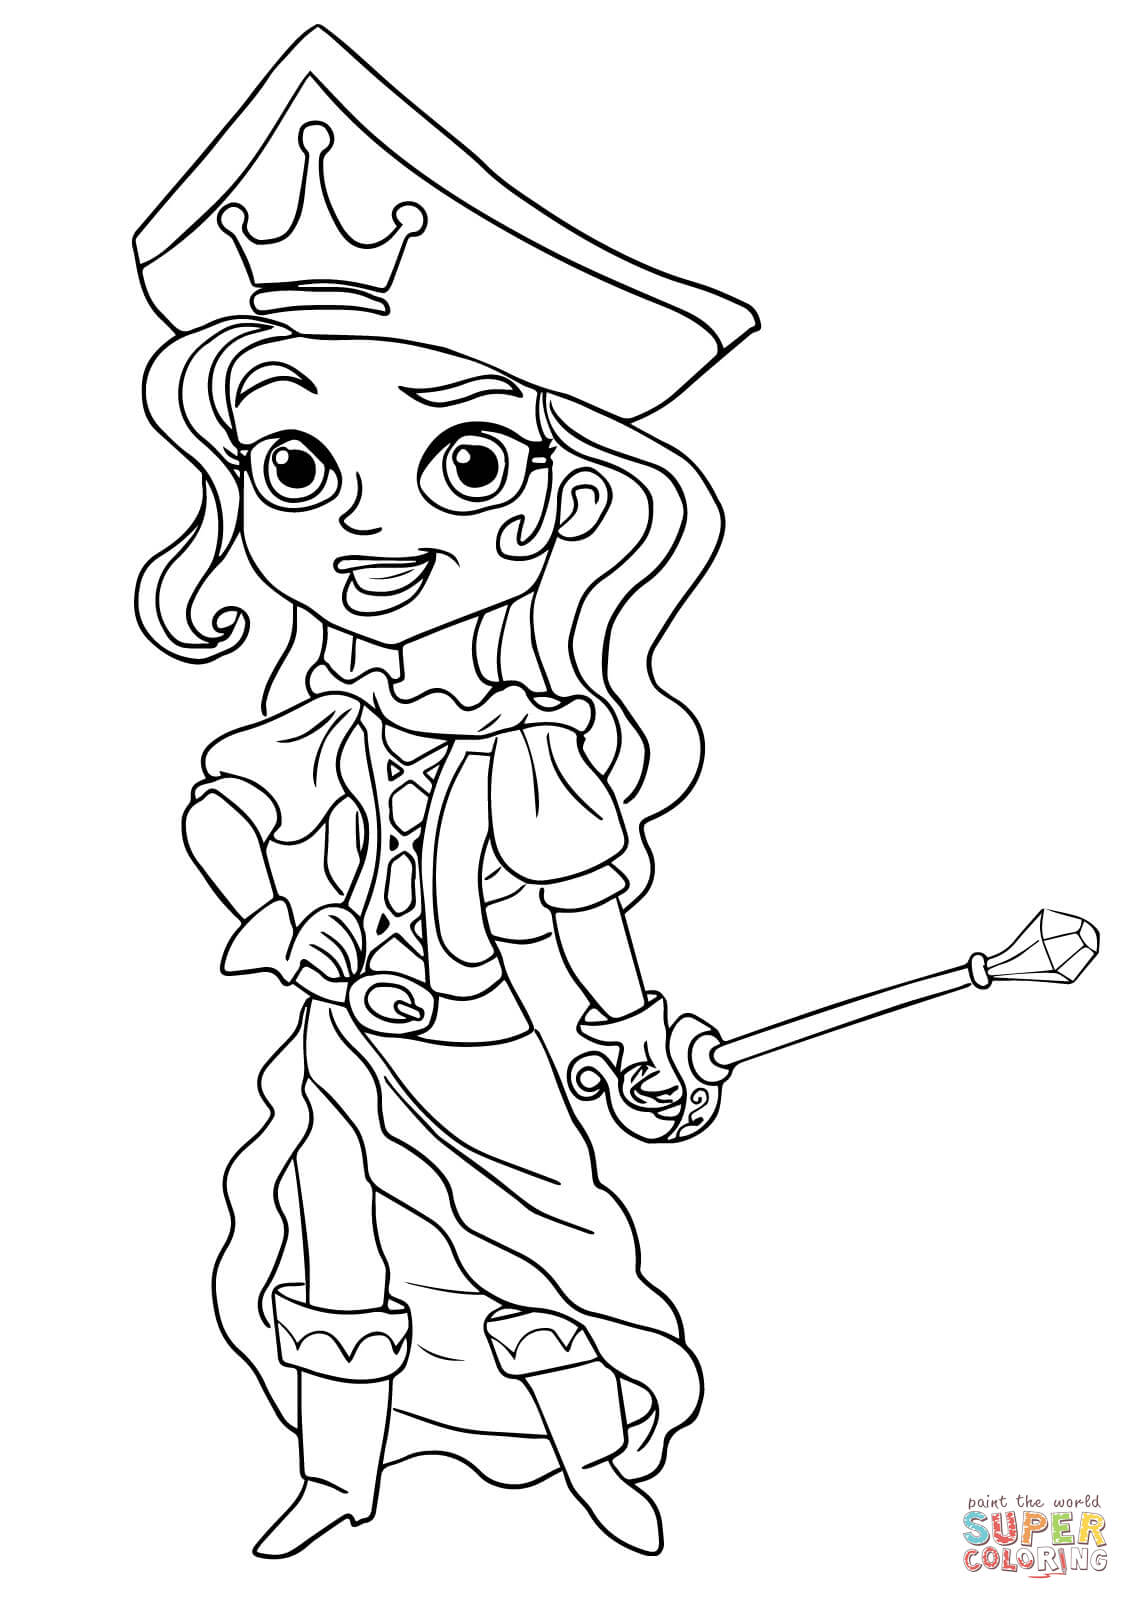 The Pirate Princess coloring page | Free Printable Coloring Pages